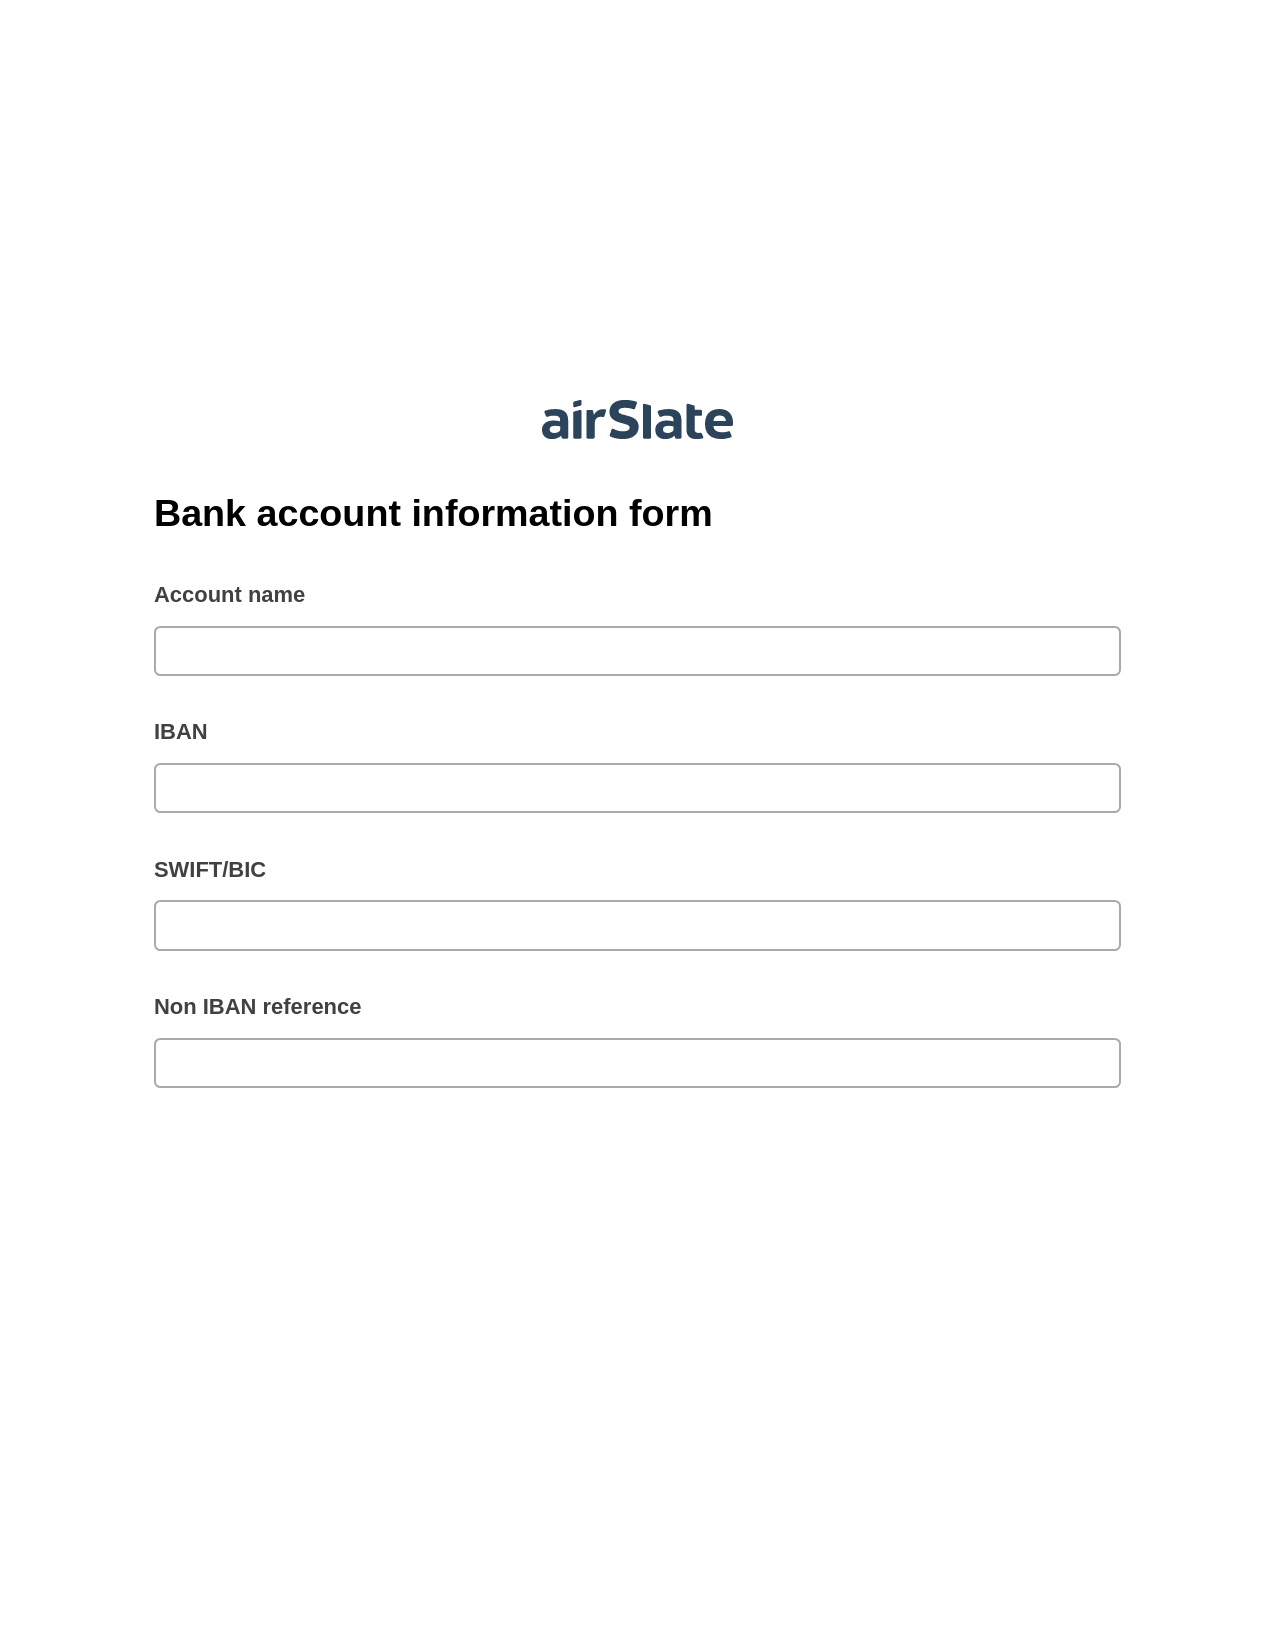 Bank account information form Pre-fill Slate from MS Dynamics 365 Records Bot, Webhook Bot, Export to Smartsheet